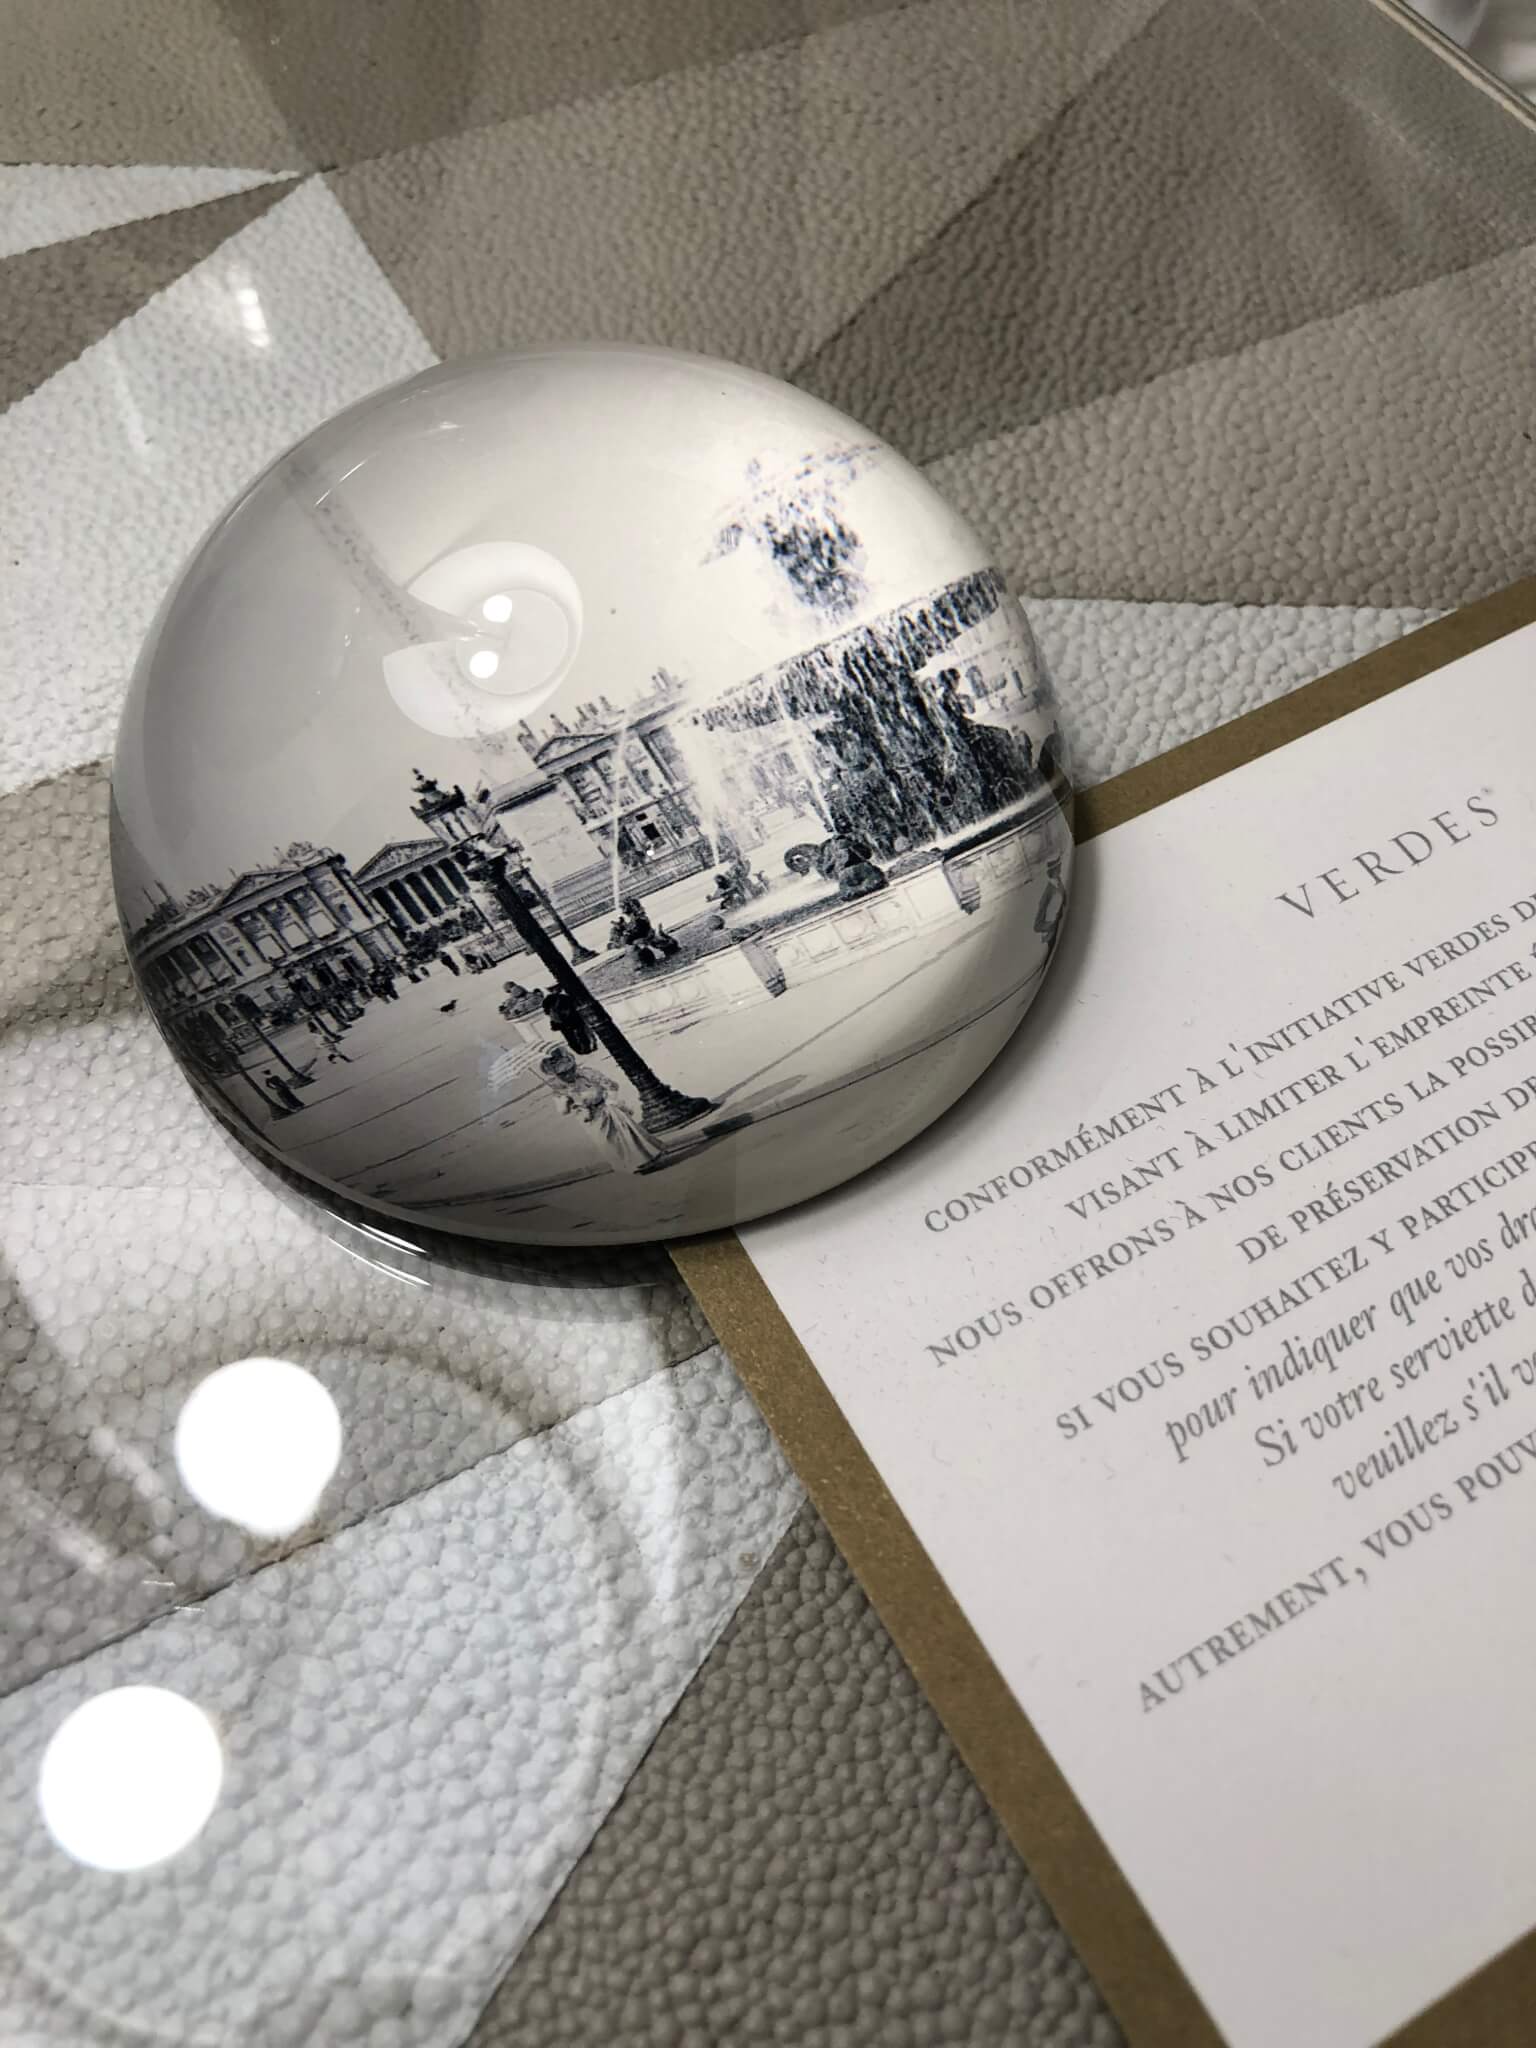 A random shot of a paper weight which sparks nostalgia, at the Hotel de Crillon, Paris, France. 